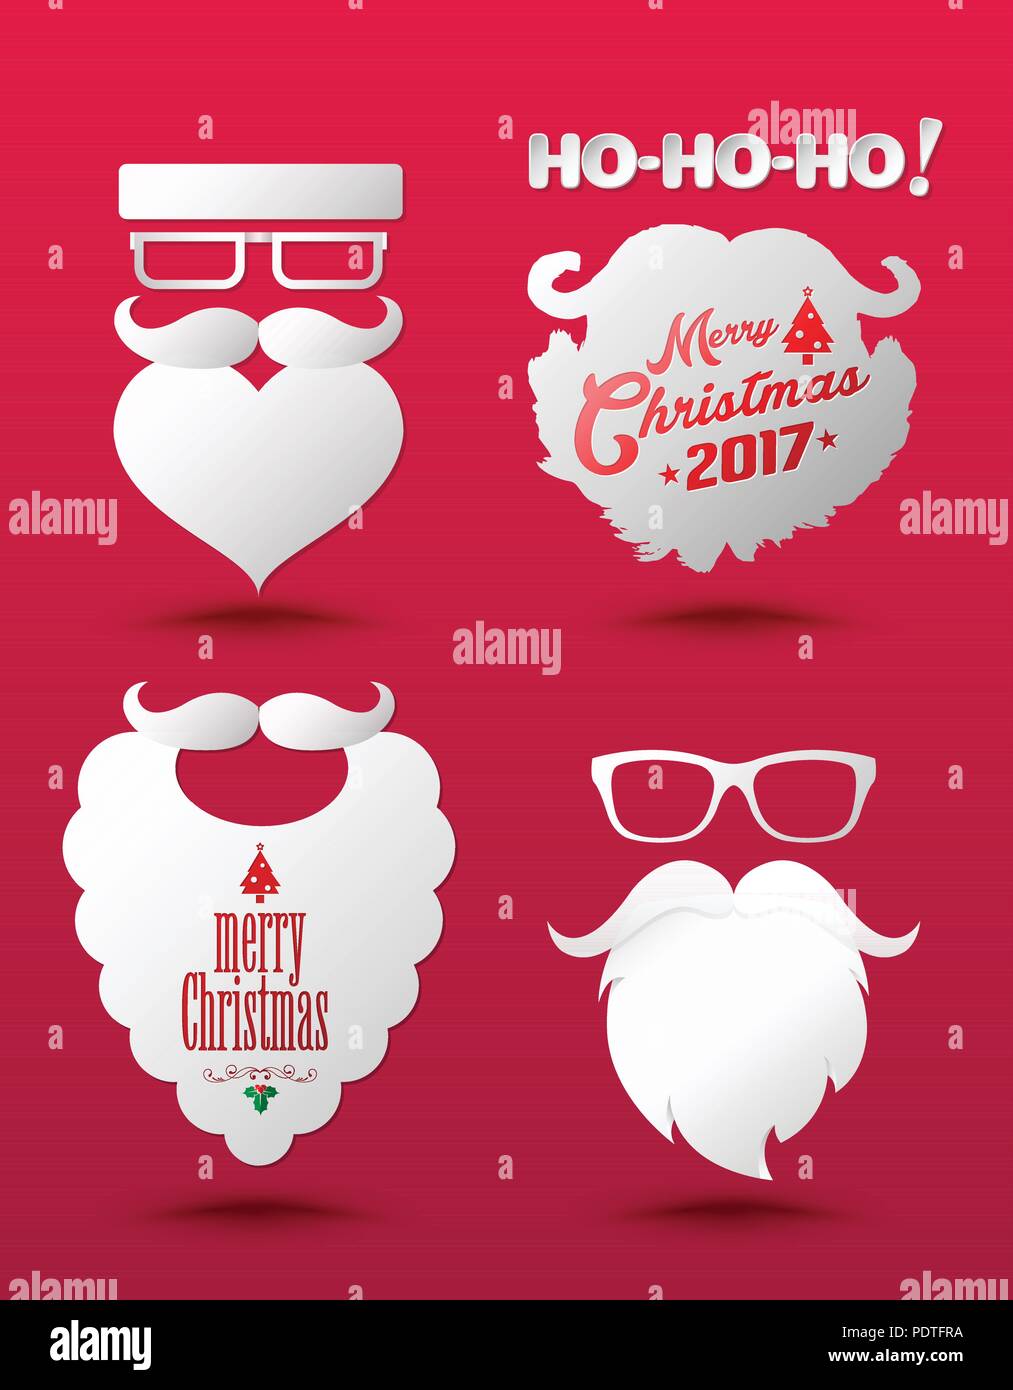 Santa Claus beard Hipster style set. Vector illustration for Christmas and New Year. Stock Vector